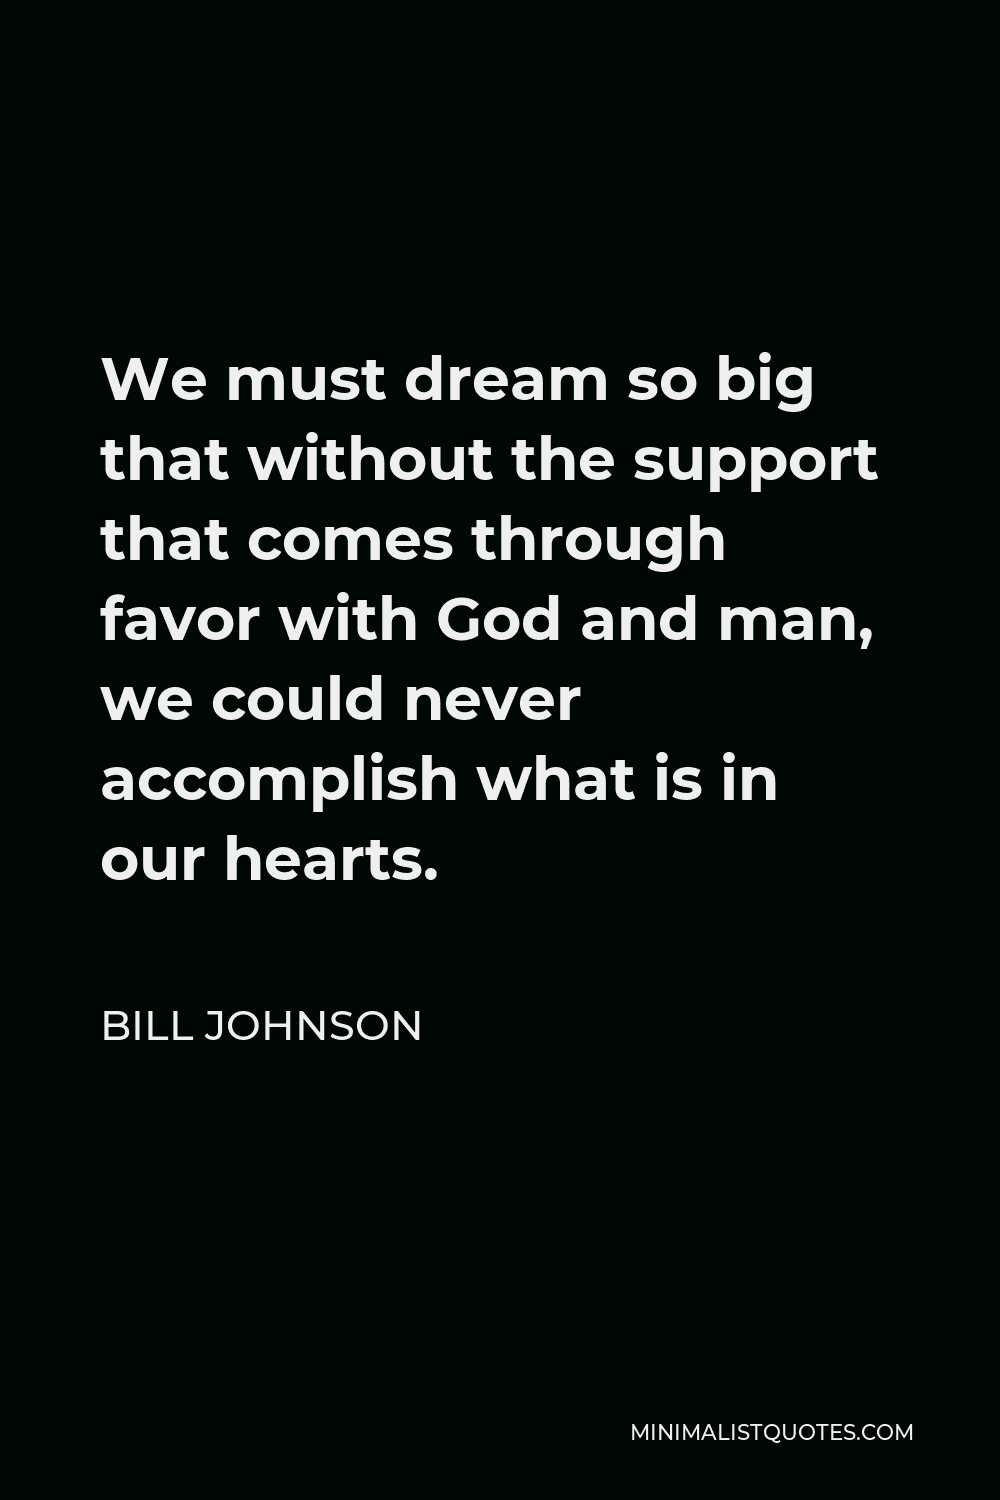 Bill Johnson Quote - We must dream so big that without the support that comes through favor with God and man, we could never accomplish what is in our hearts.